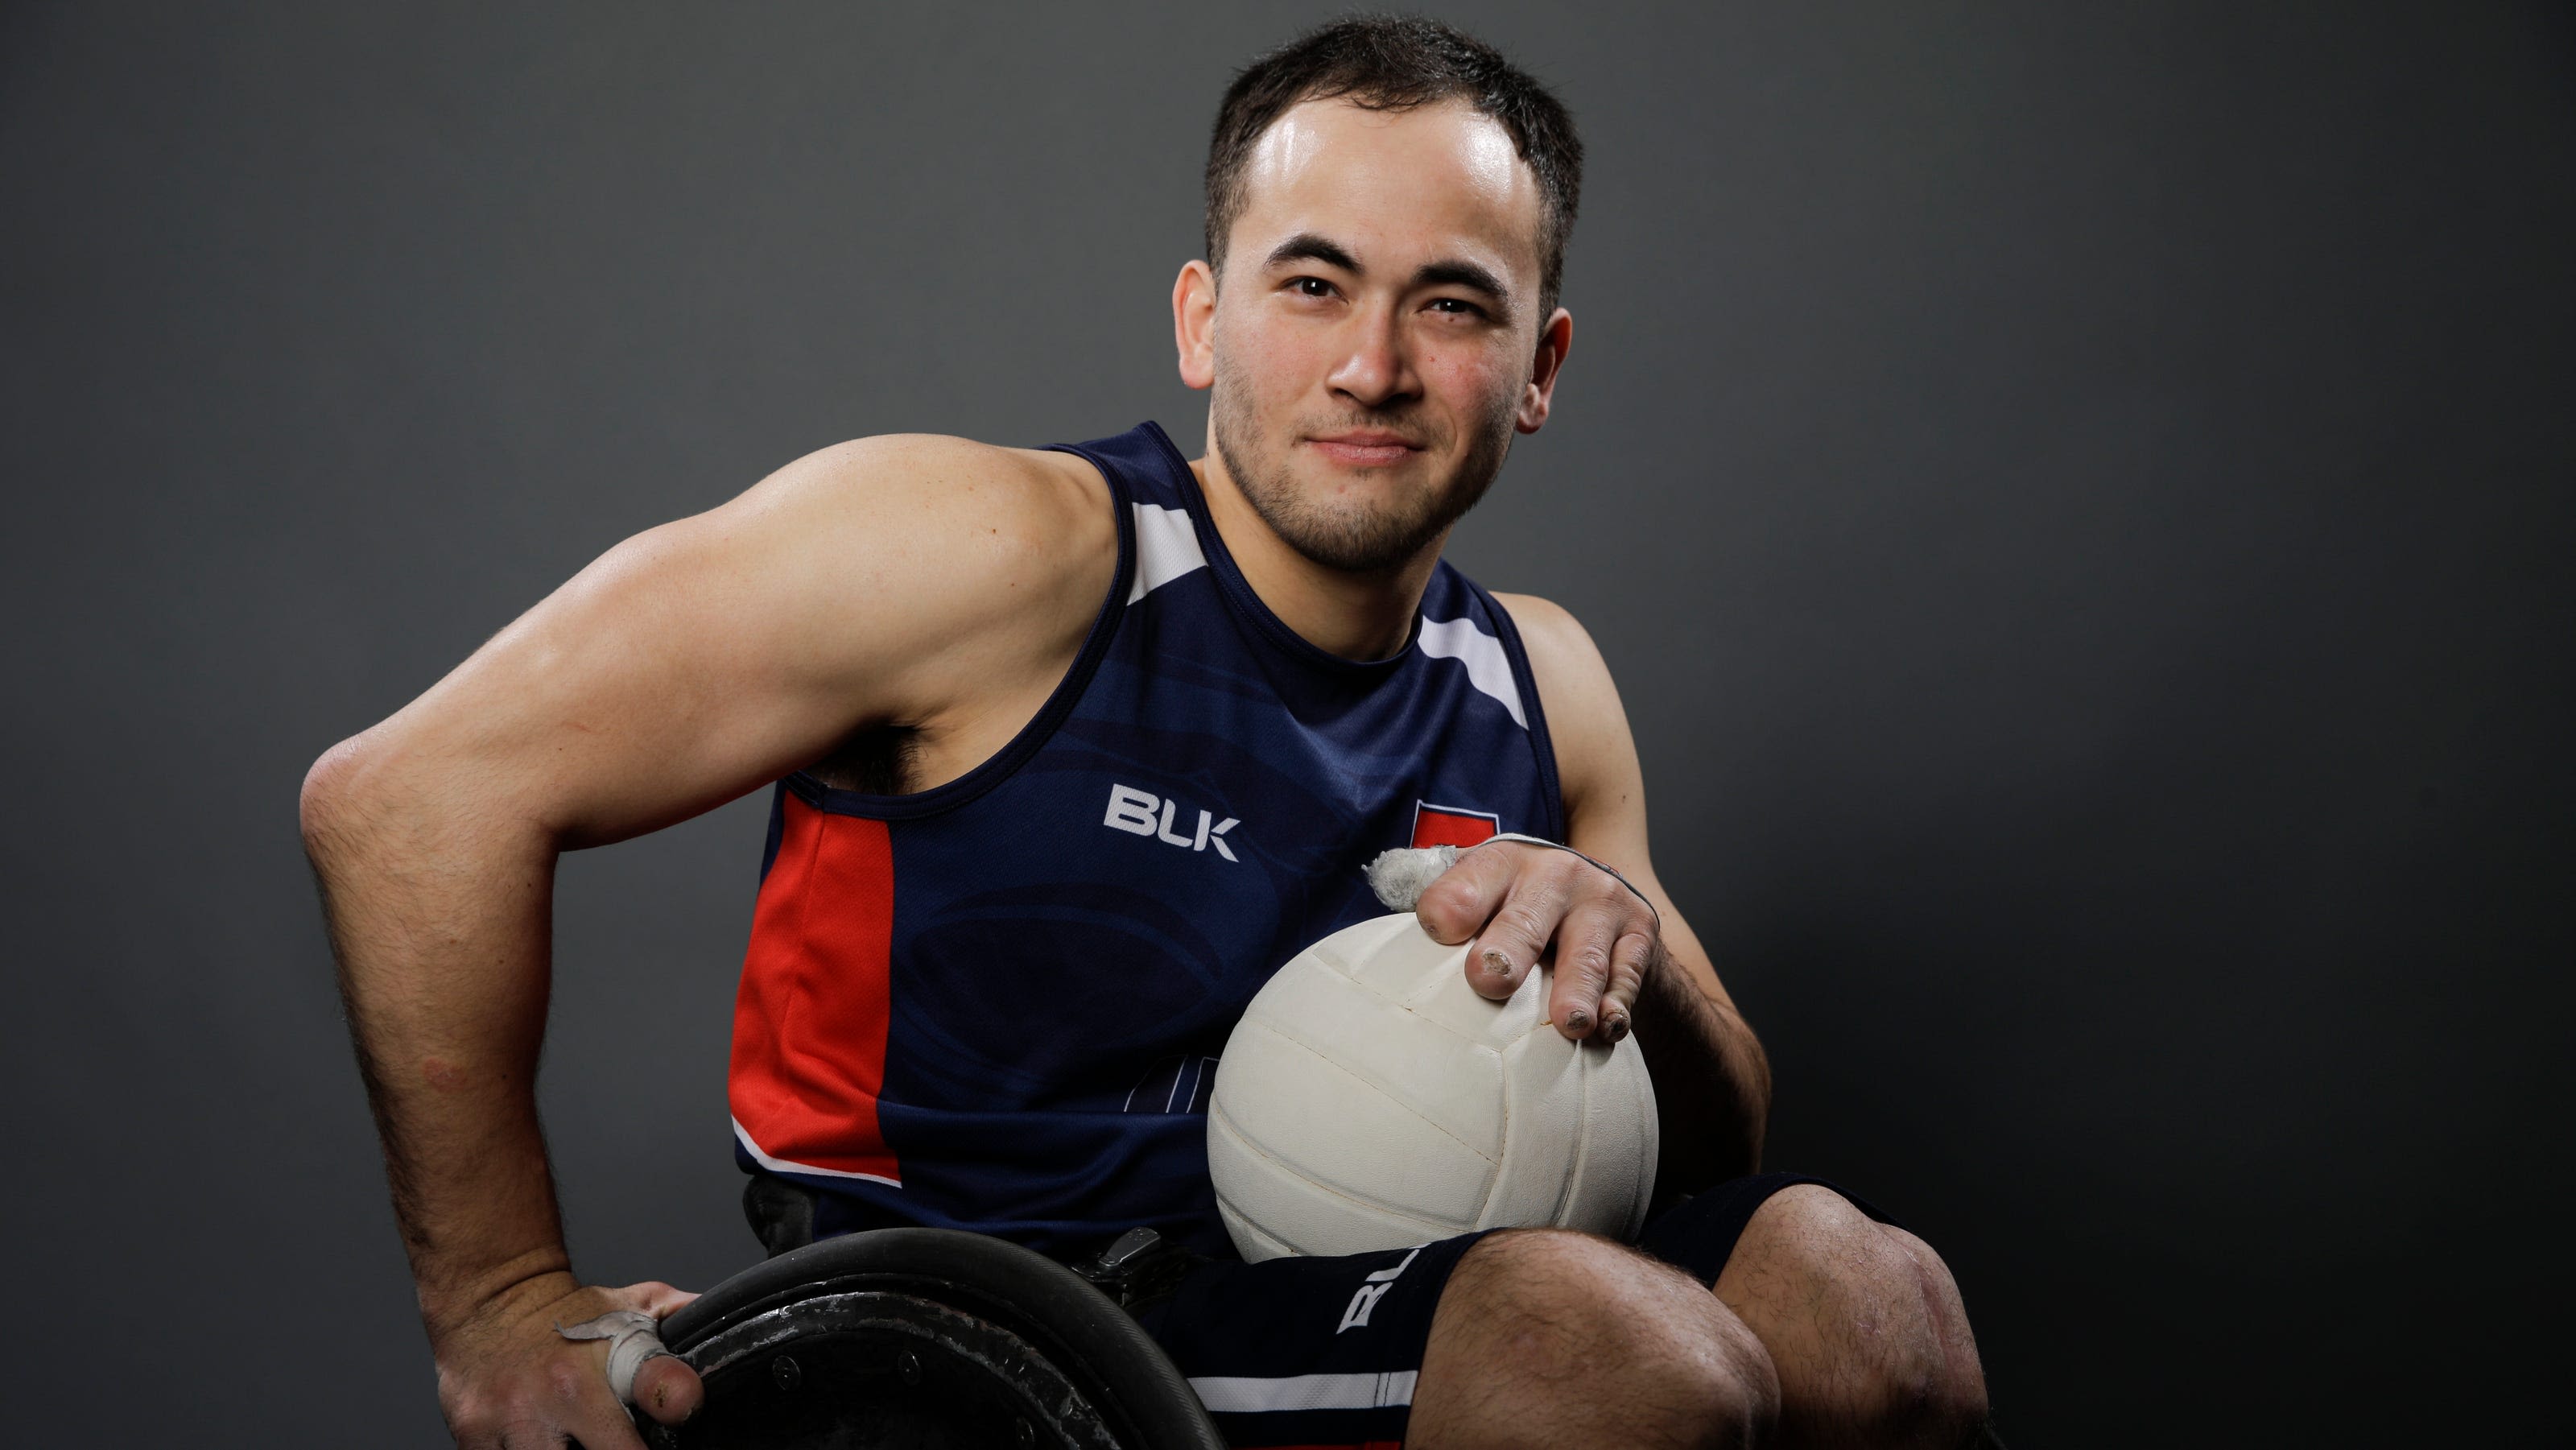 Ann Arbor's Chuck Aoki aiming for elusive gold medal in Paralympic Games